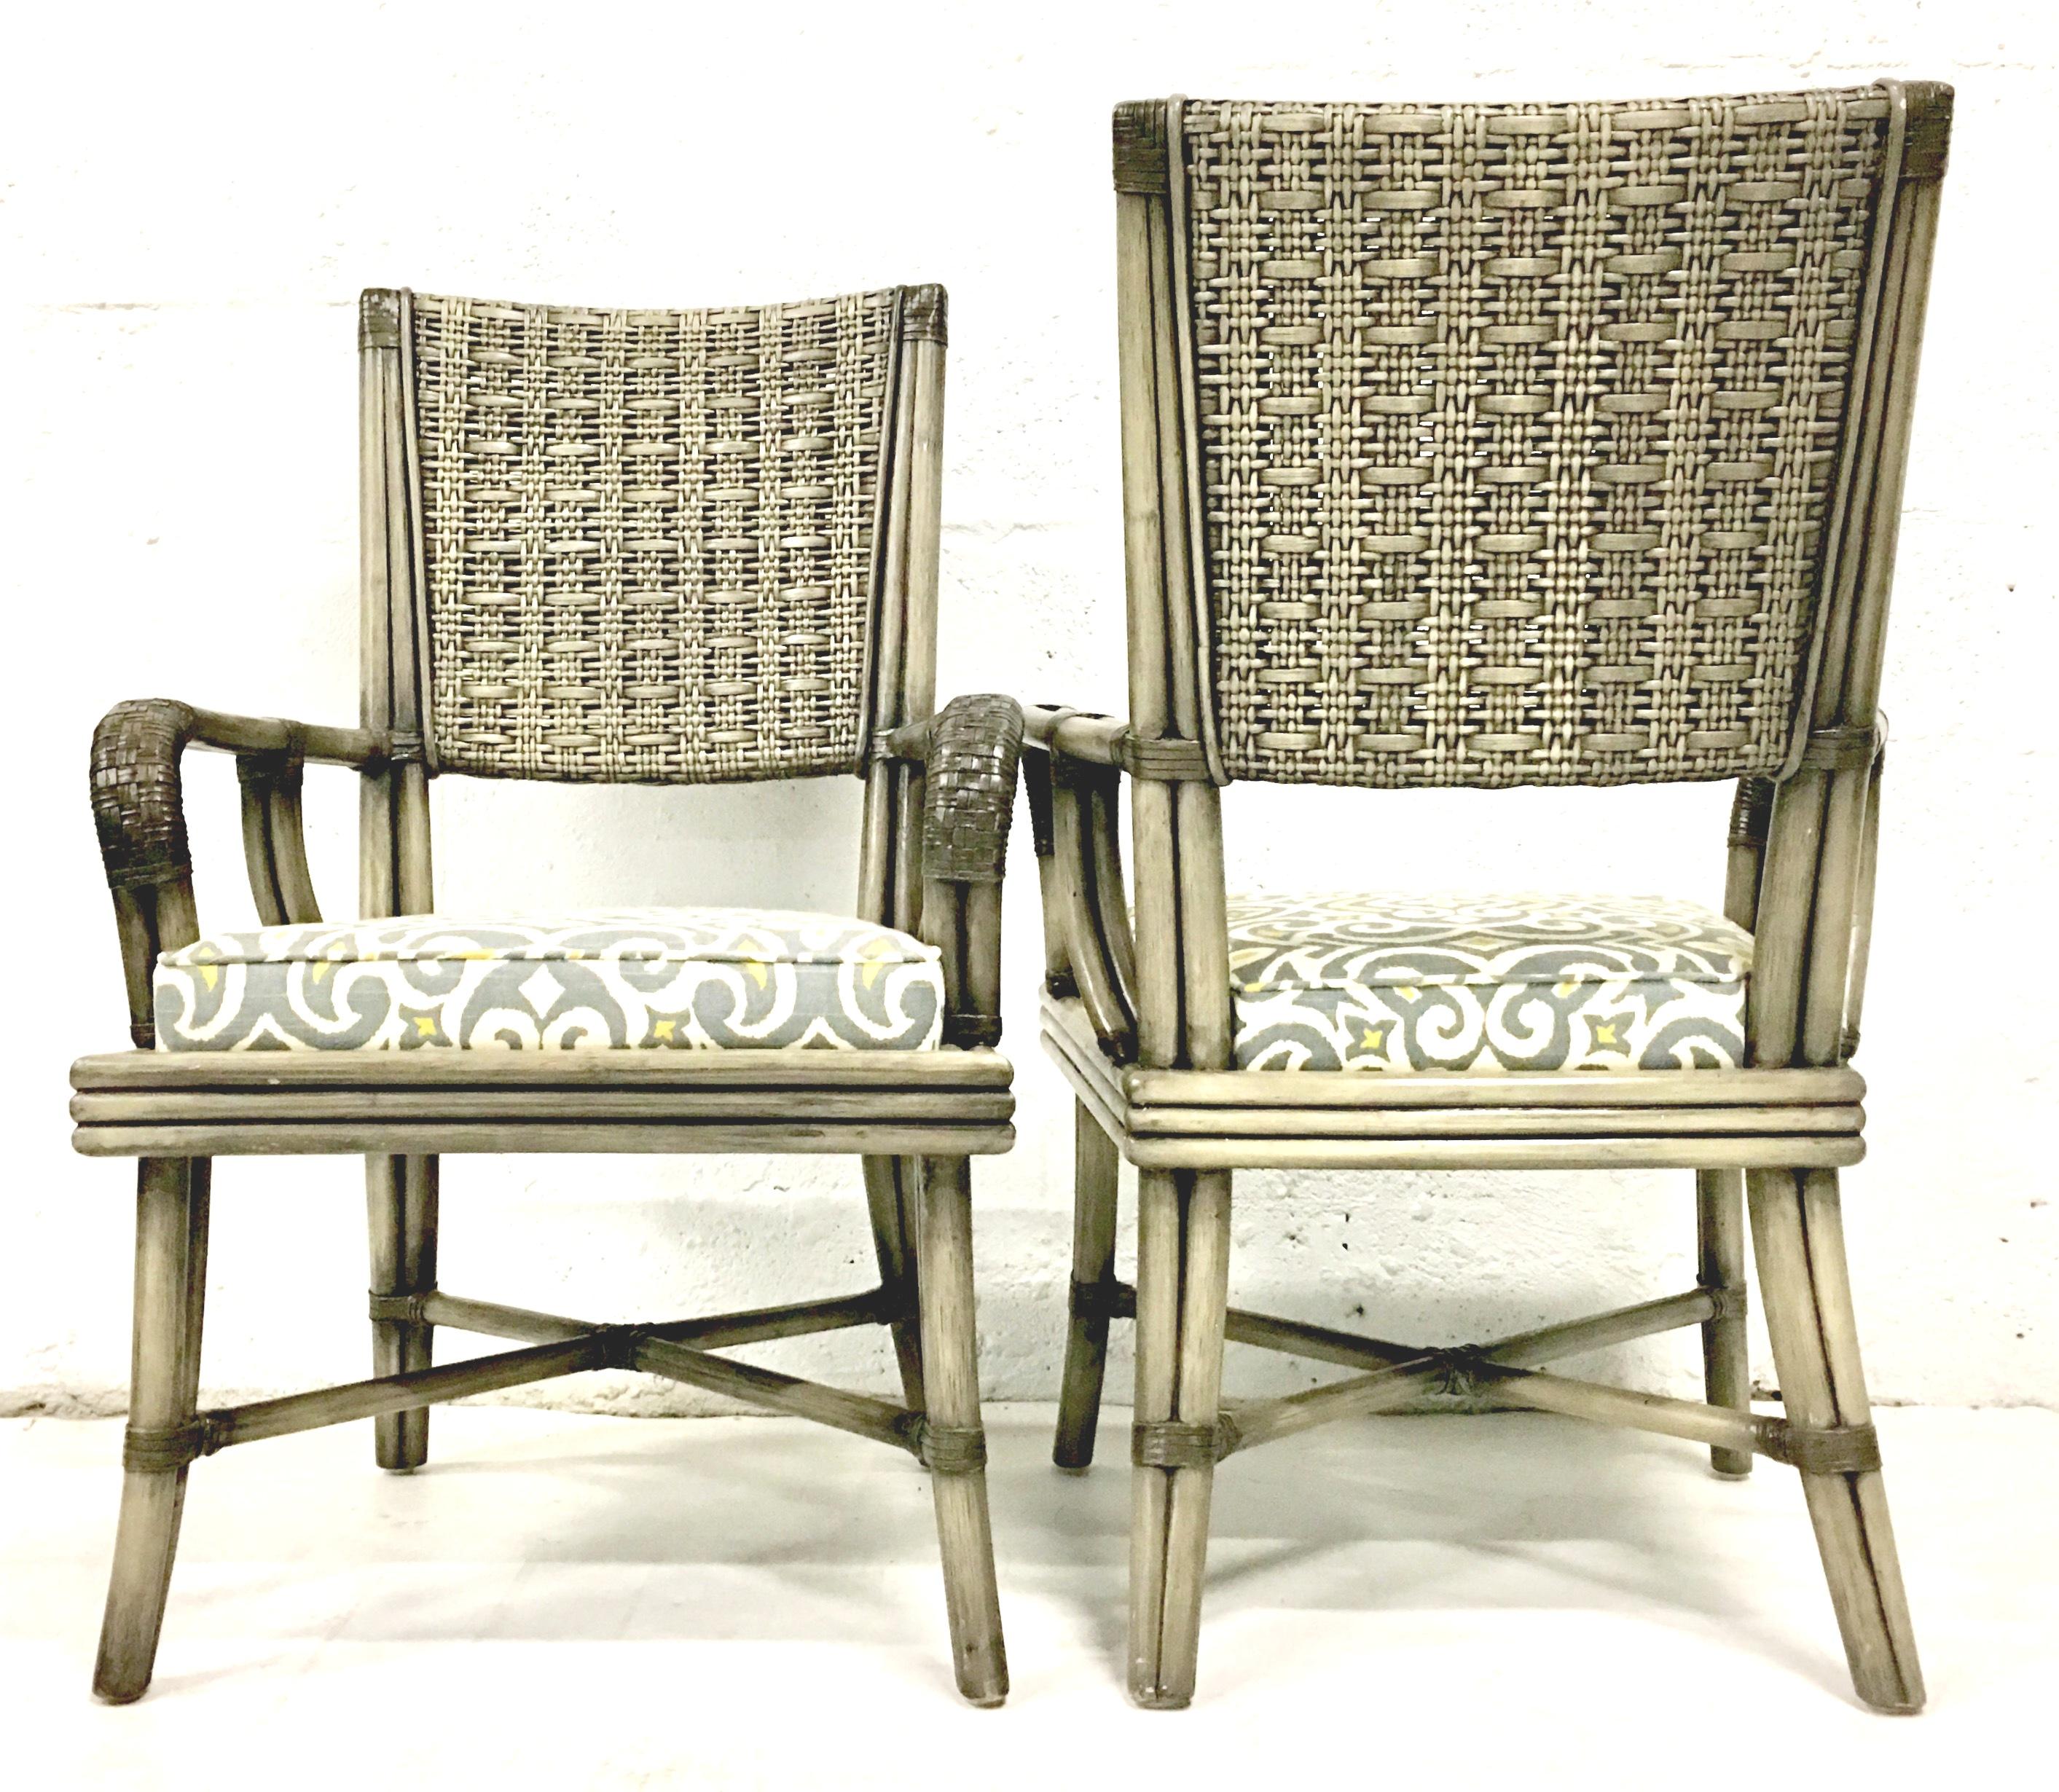 21st century contemporary pair of rattan upholstered armchairs by, David Francis. Features a stained grey wash gloss finish with leather wrap and woven detail. Upholstered in a cotton blend indoor-outdoor, white, grey and yellow self welt fabric.